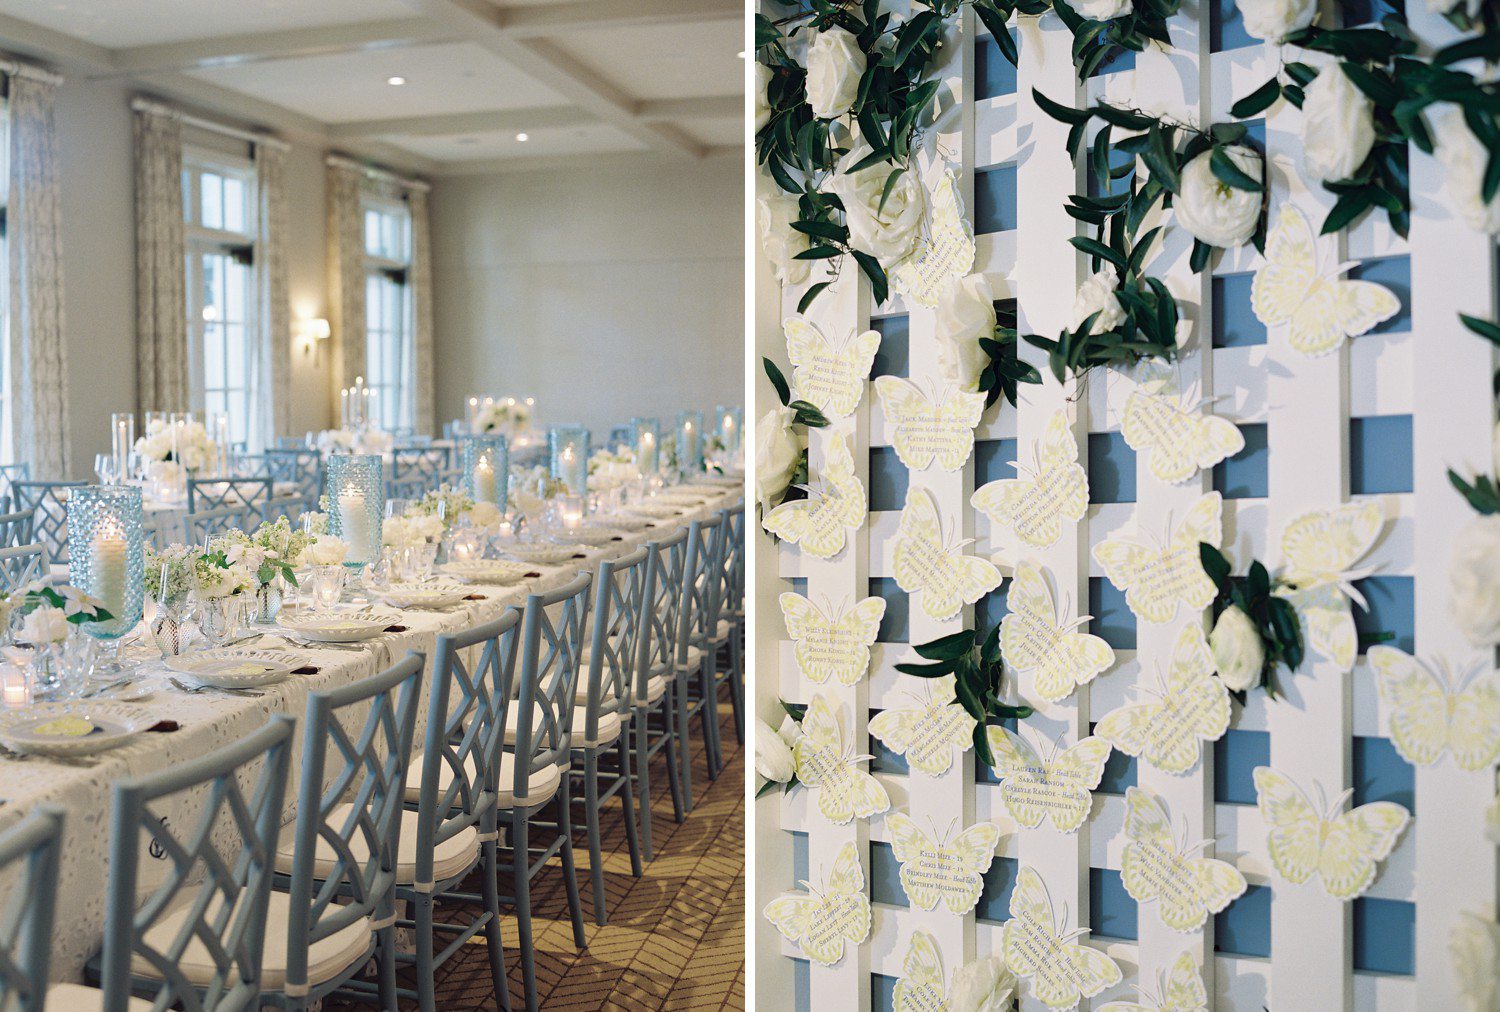 Blue and white wedding reception decor and table details.